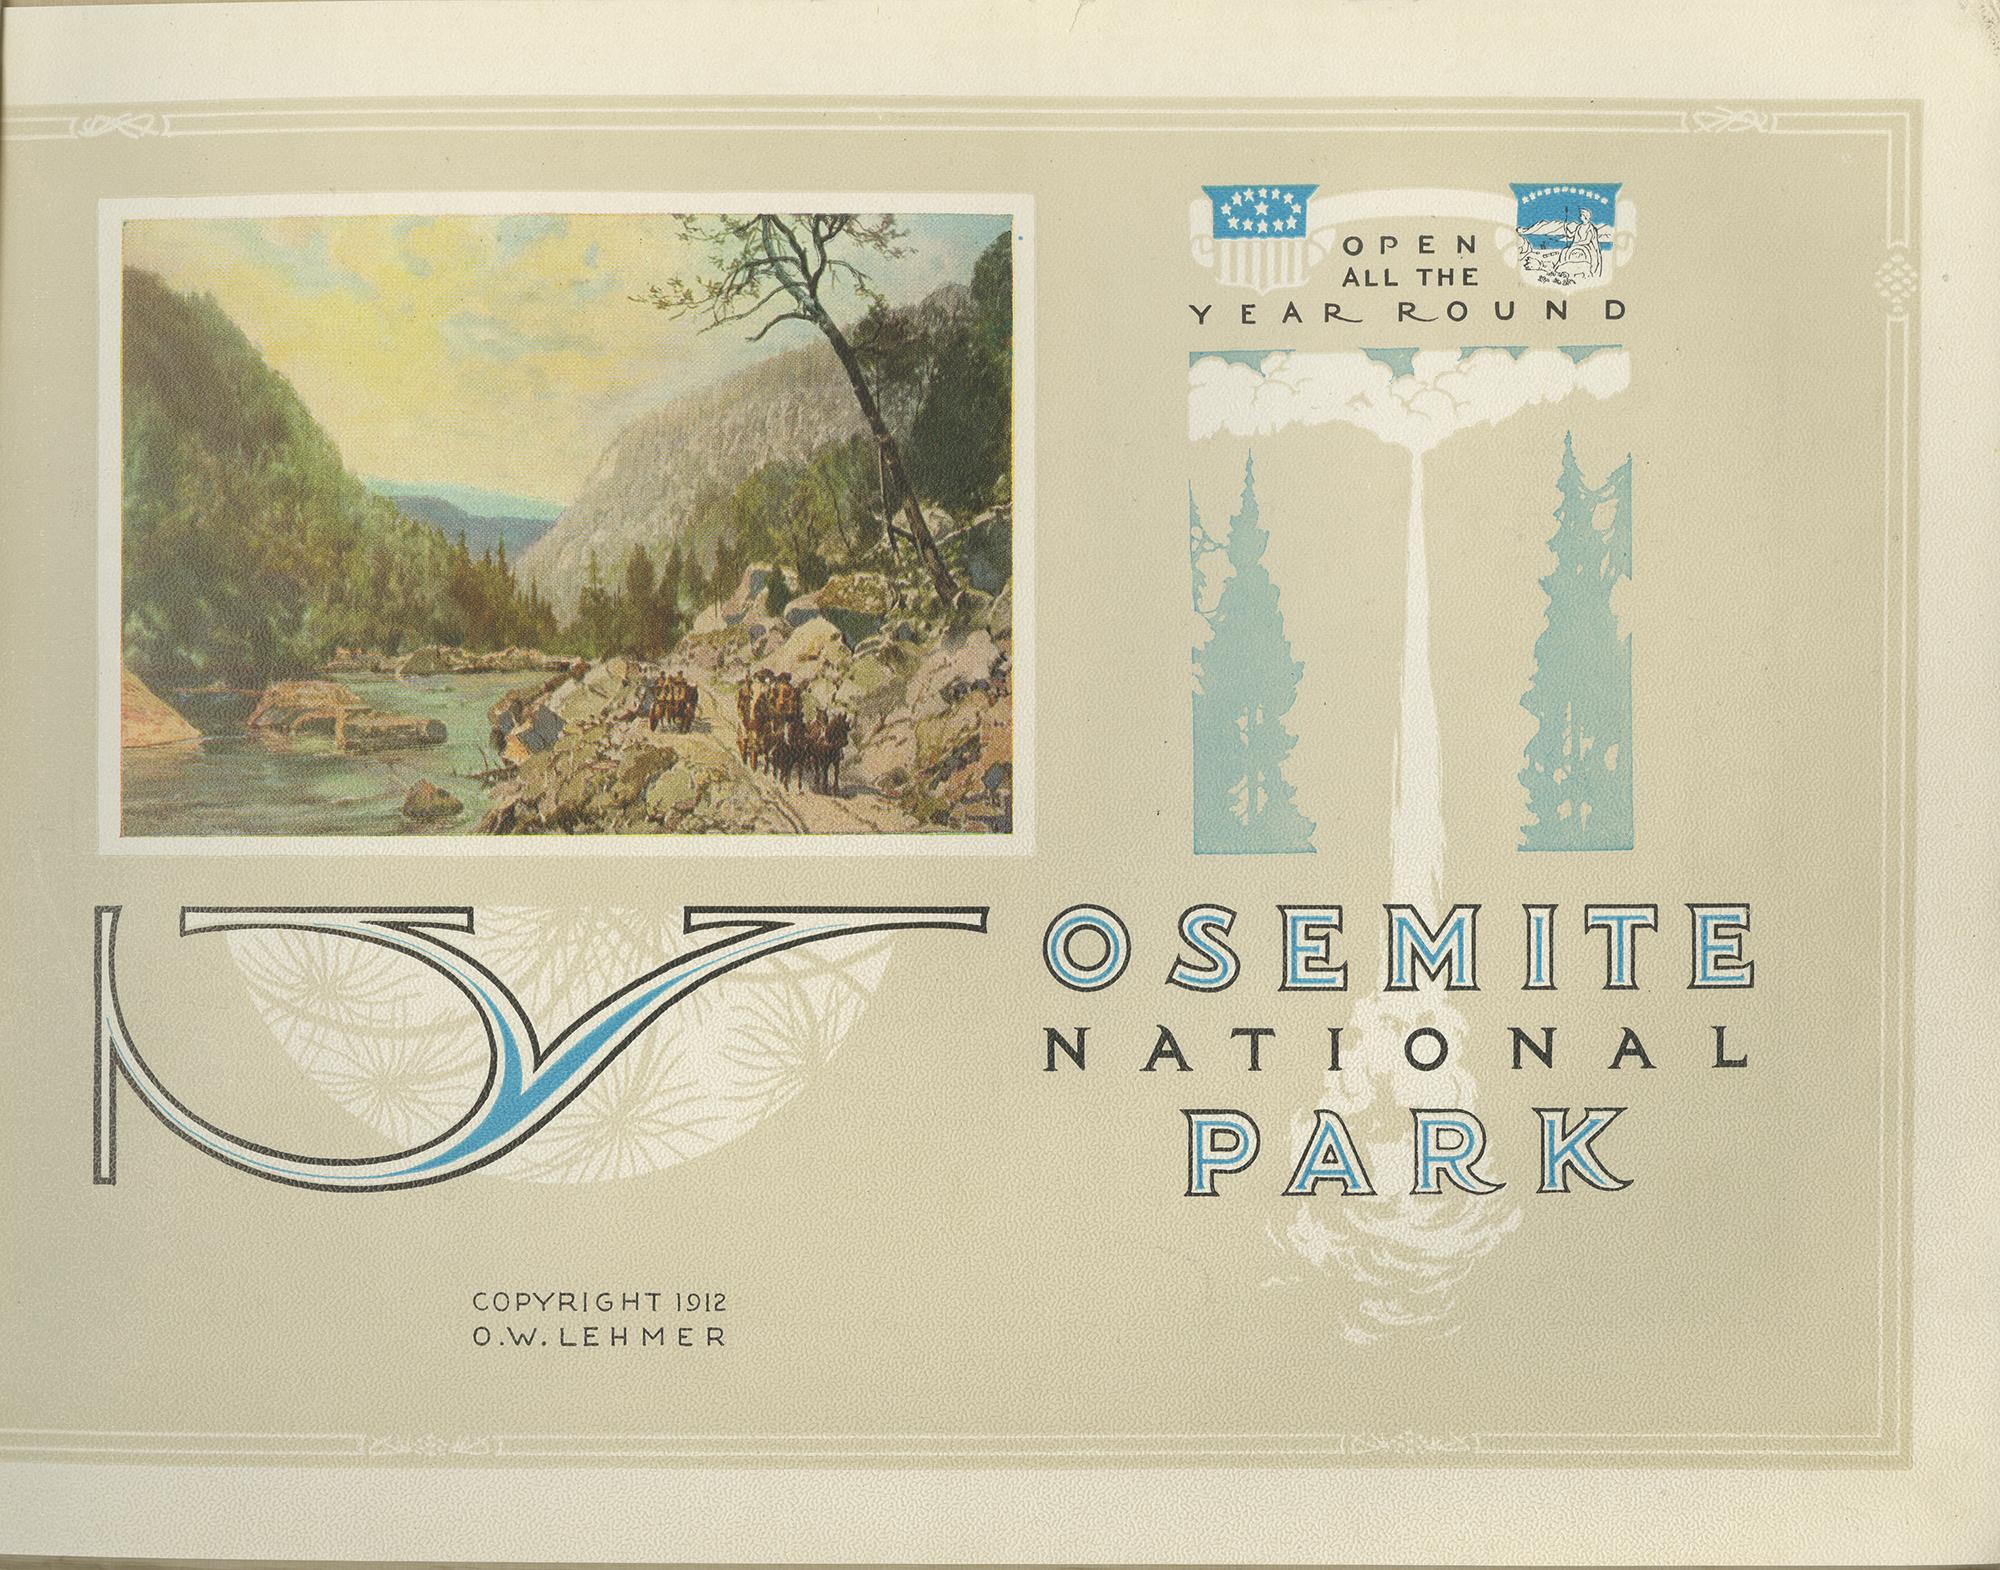 'Yosemite National Park' by O.W. Lehmer. 65 illustrations, of which 14 are in color, original embossed cream wrappers printed in gold, color illustration affixed to front wrapper, string tied. An elaborate, well-illustrated booklet issued by